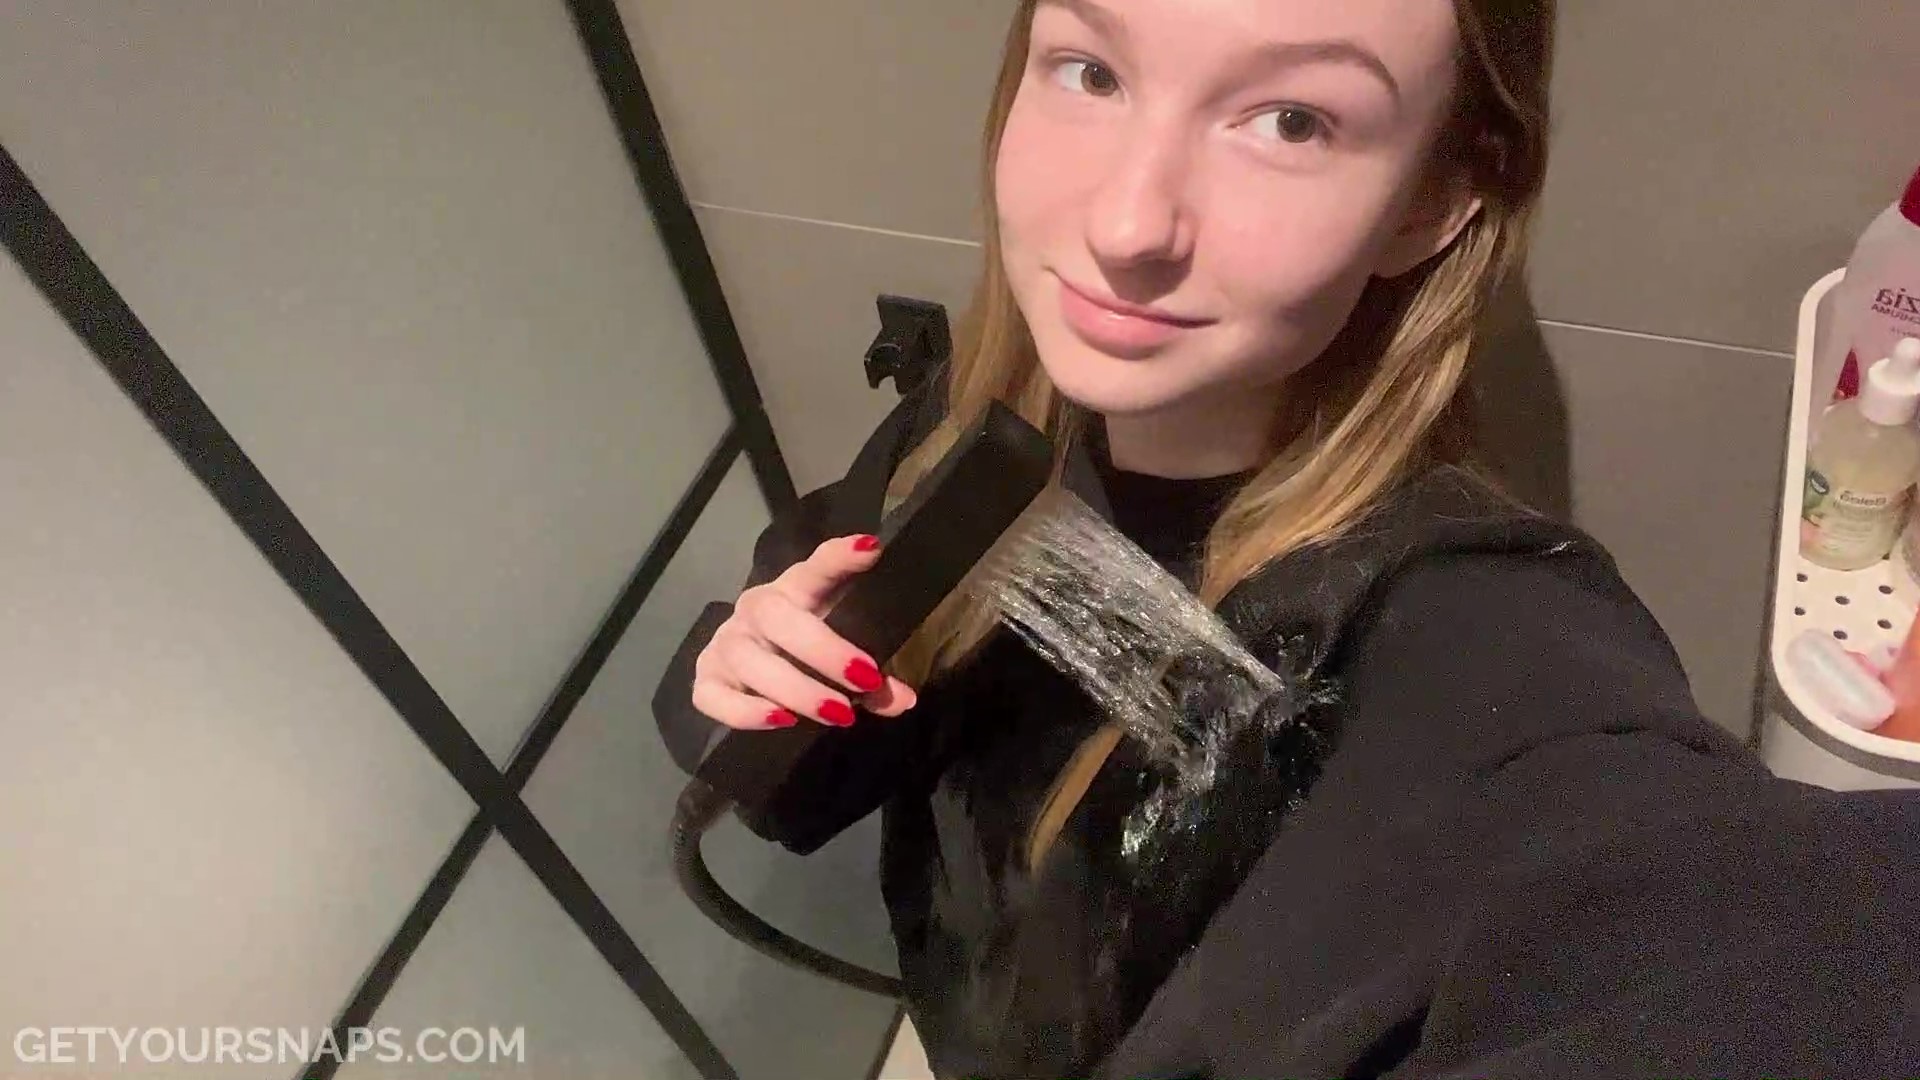 Zora takes a selfie video in the shower - frame at 1m36s